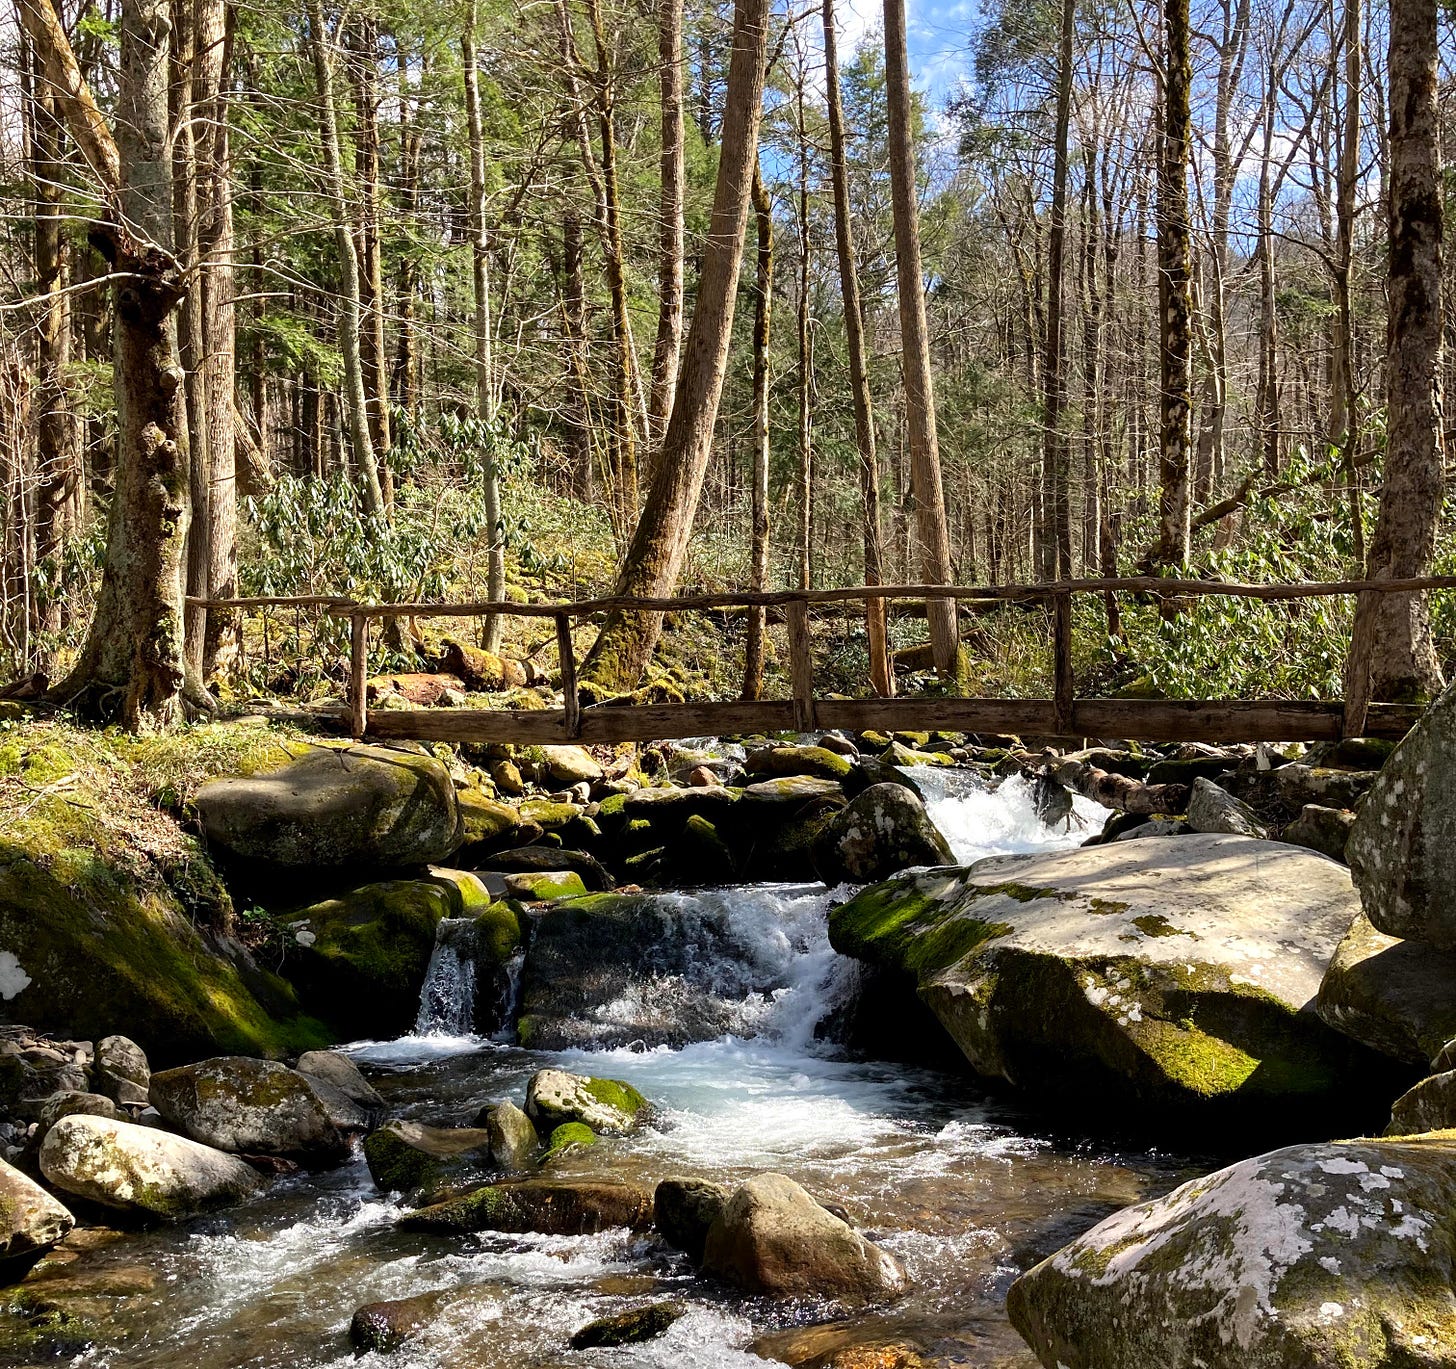 scenic view of a rough wooden bridge stretching over a creek running through granite rocks and bare trees, under a blue sky.